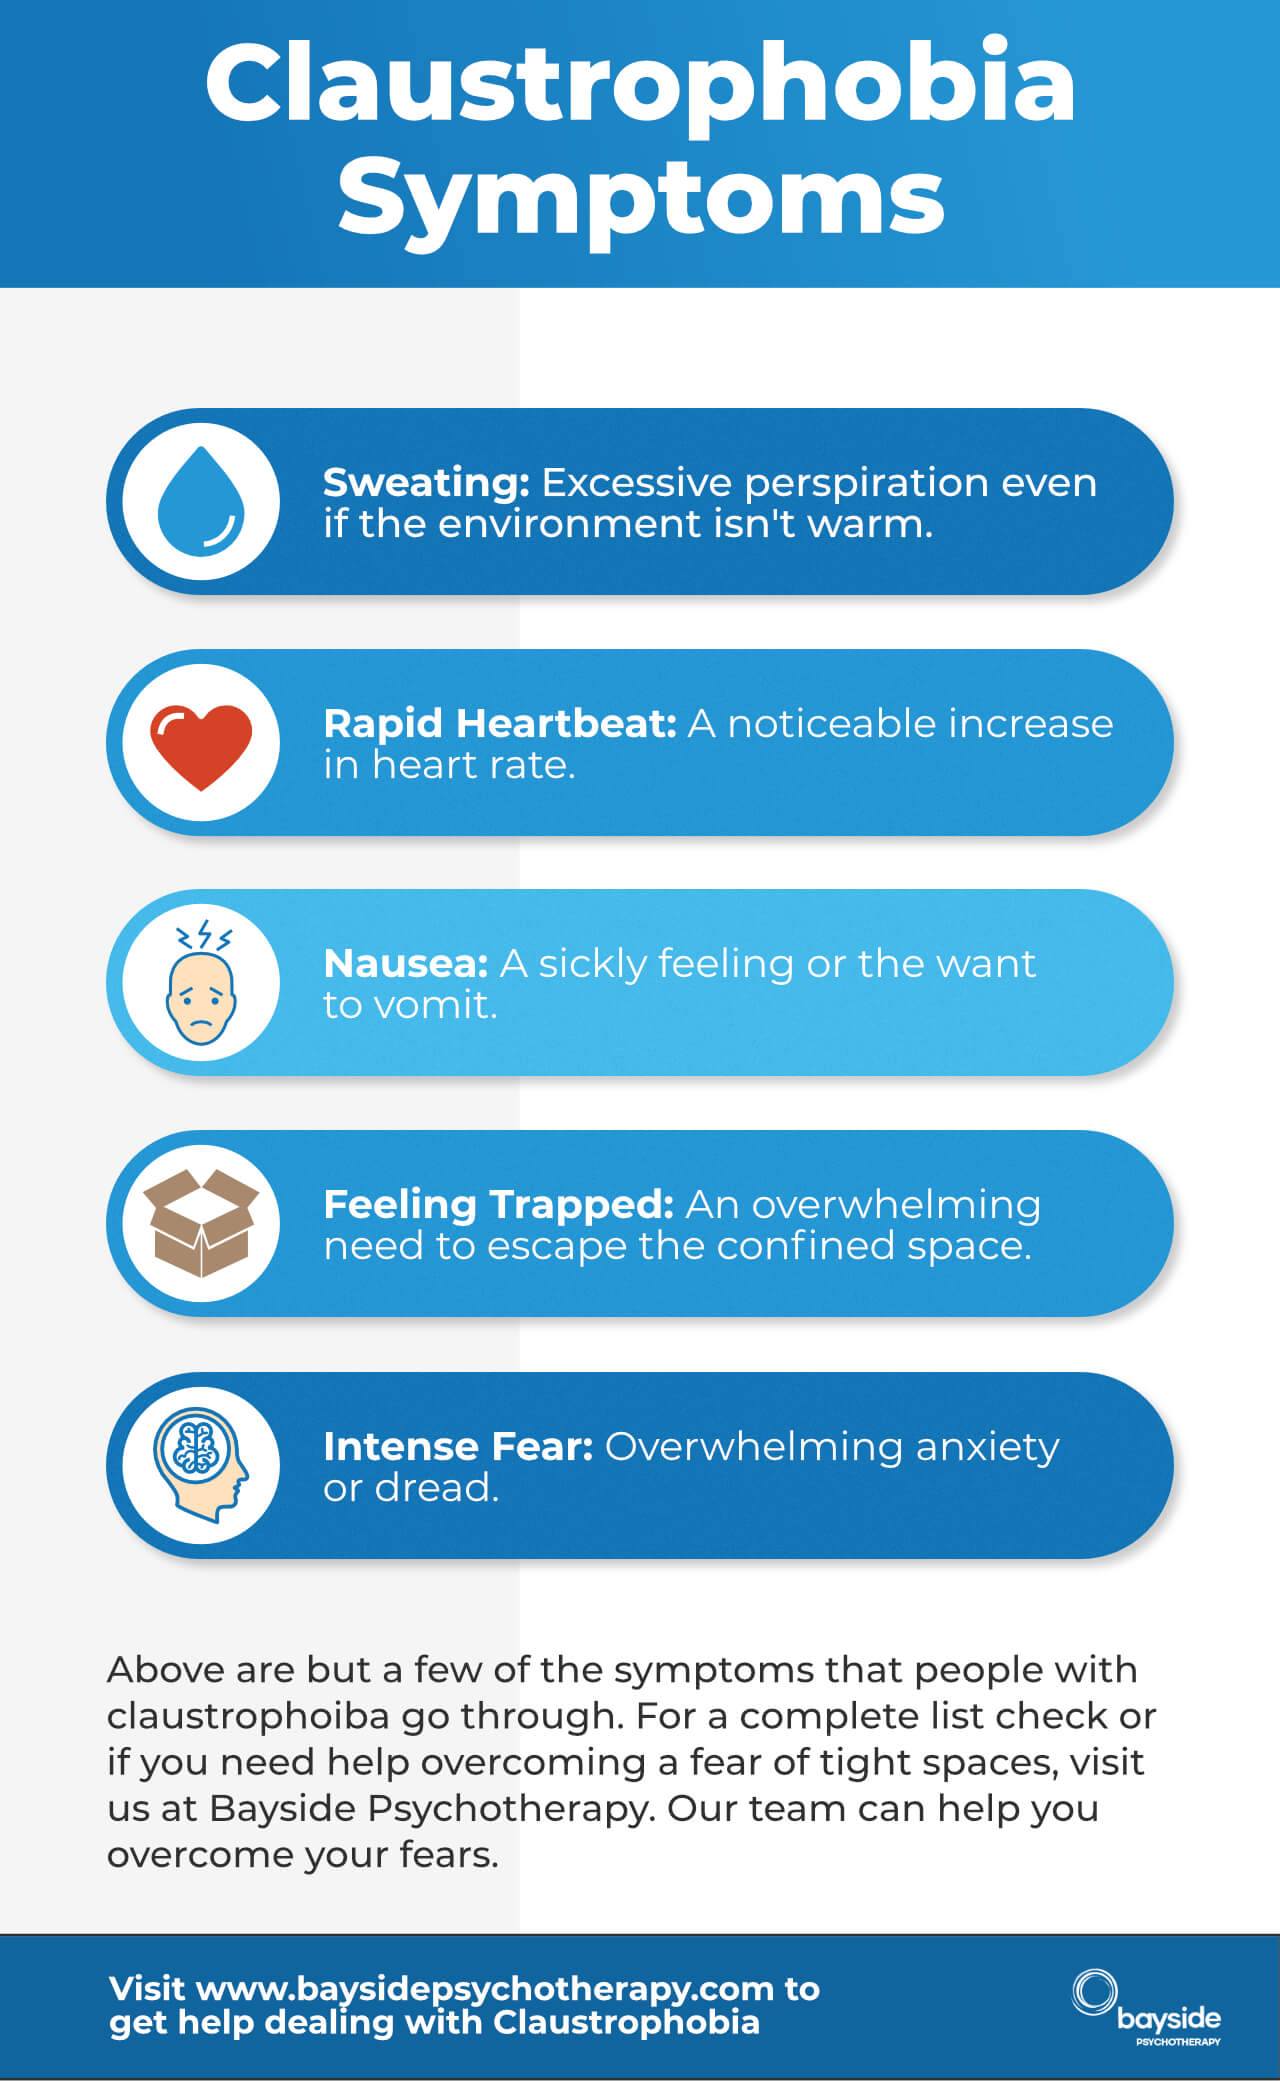 Claustrophobia Symptoms Infographic - Bayside Psychotherapy